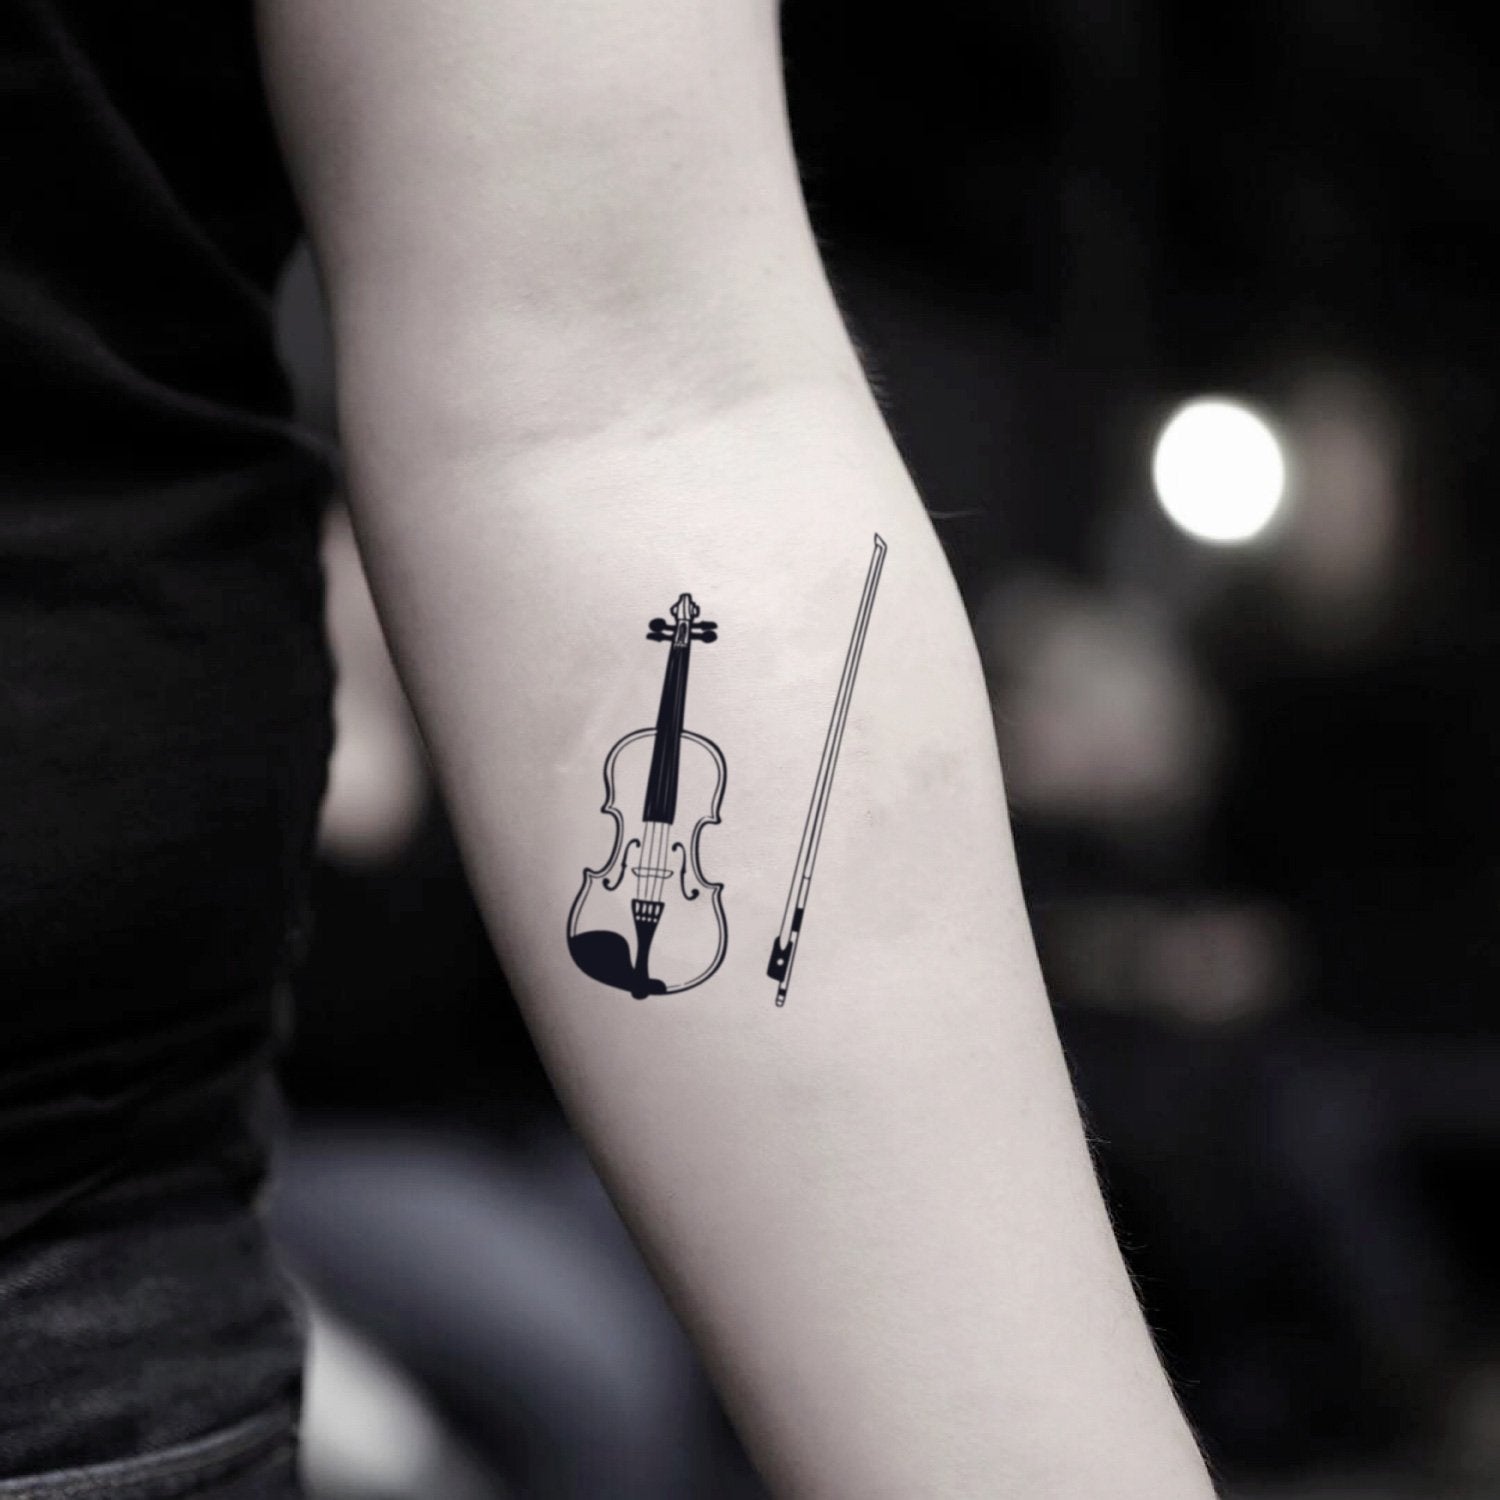 My new tat on my hand #tattoo #music #bass #ink #hands | Flickr